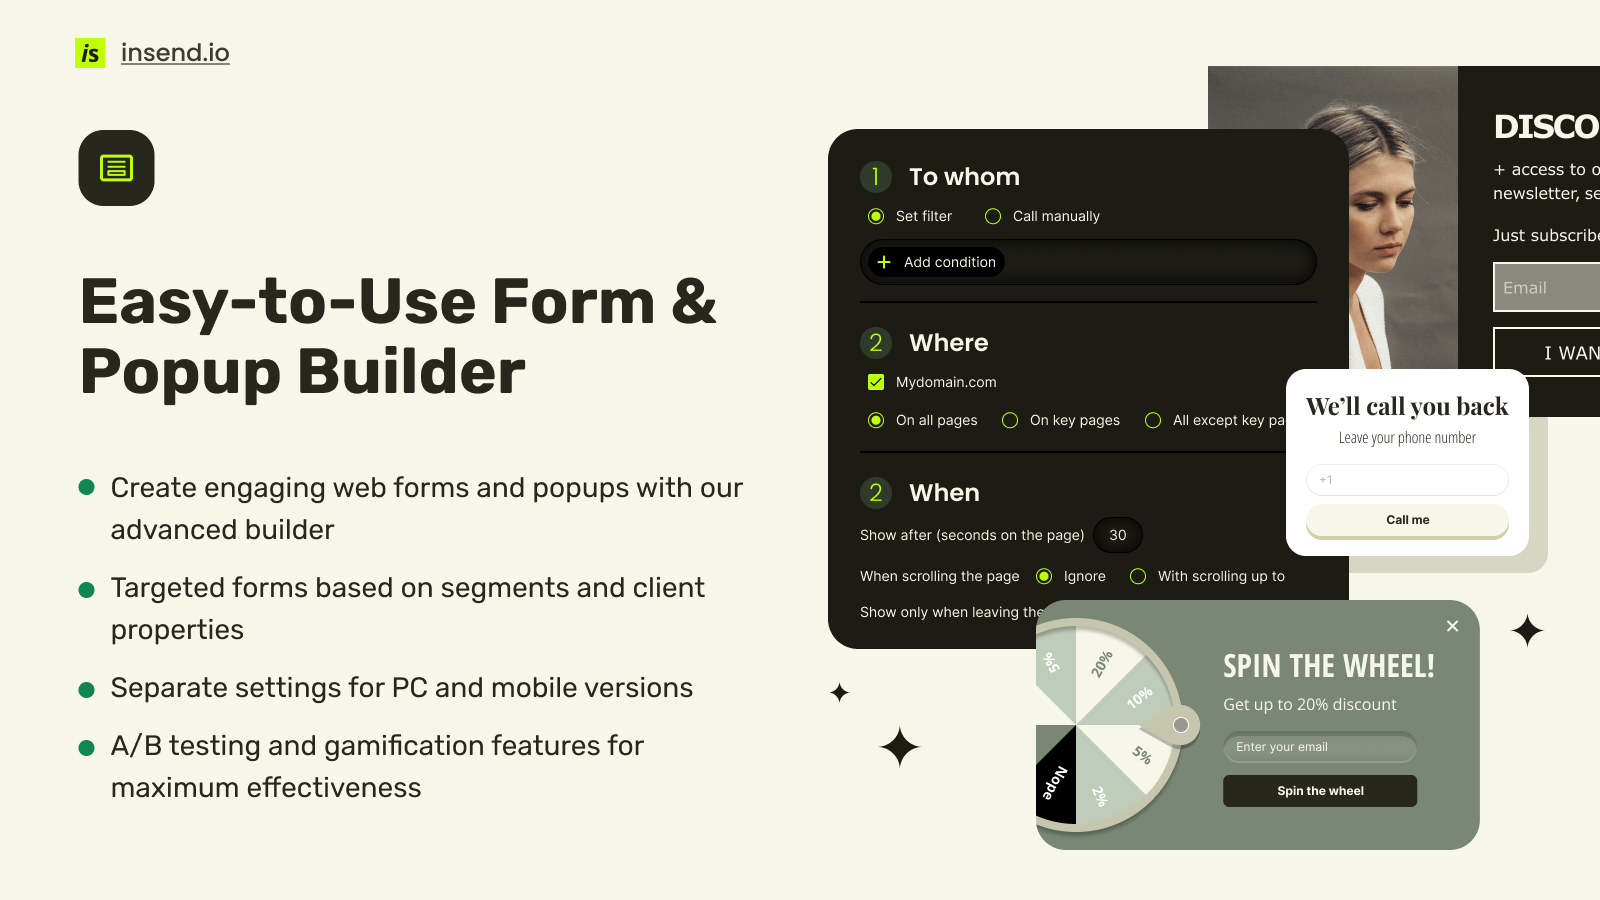 Easy-to-Use Form & Popup Builder